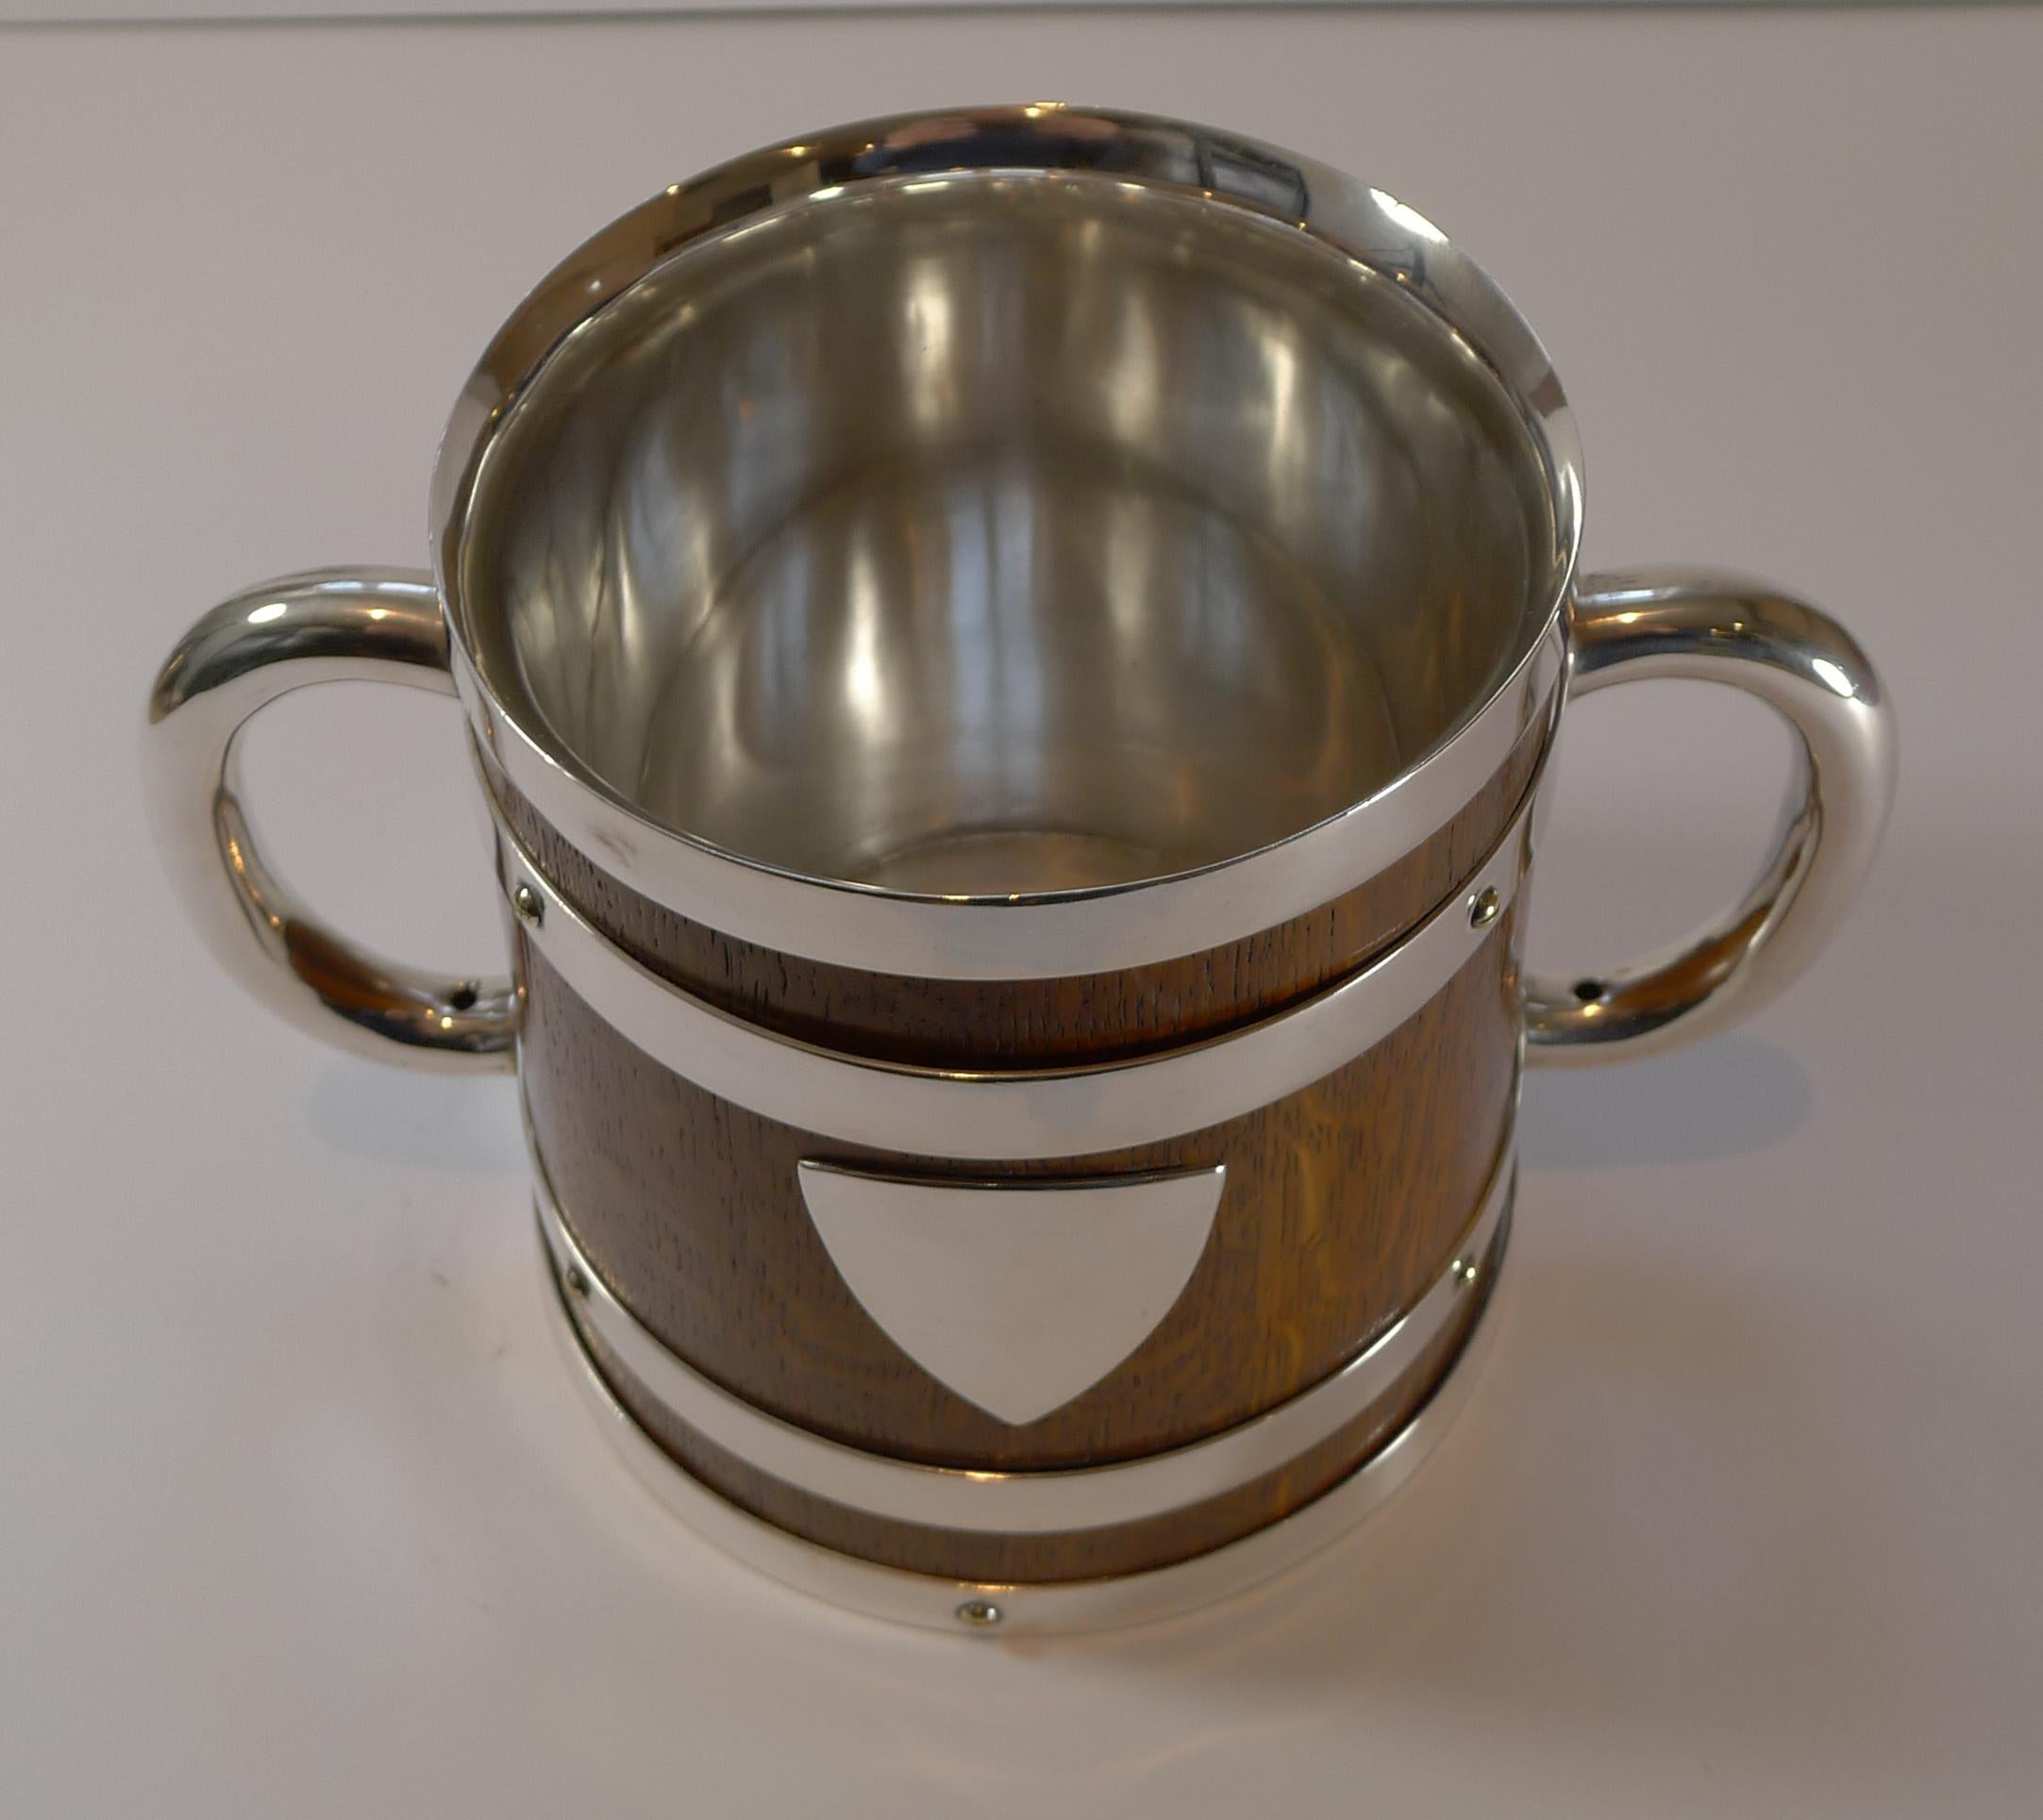 A very handsome late Victorian two-handled loving cup made from solid English Oak with silver plated fittings. The piece is signed by the Birmingham silversmith, Thomas Harwood & Sons, this mark dating the piece to pre-1896, Victorian in